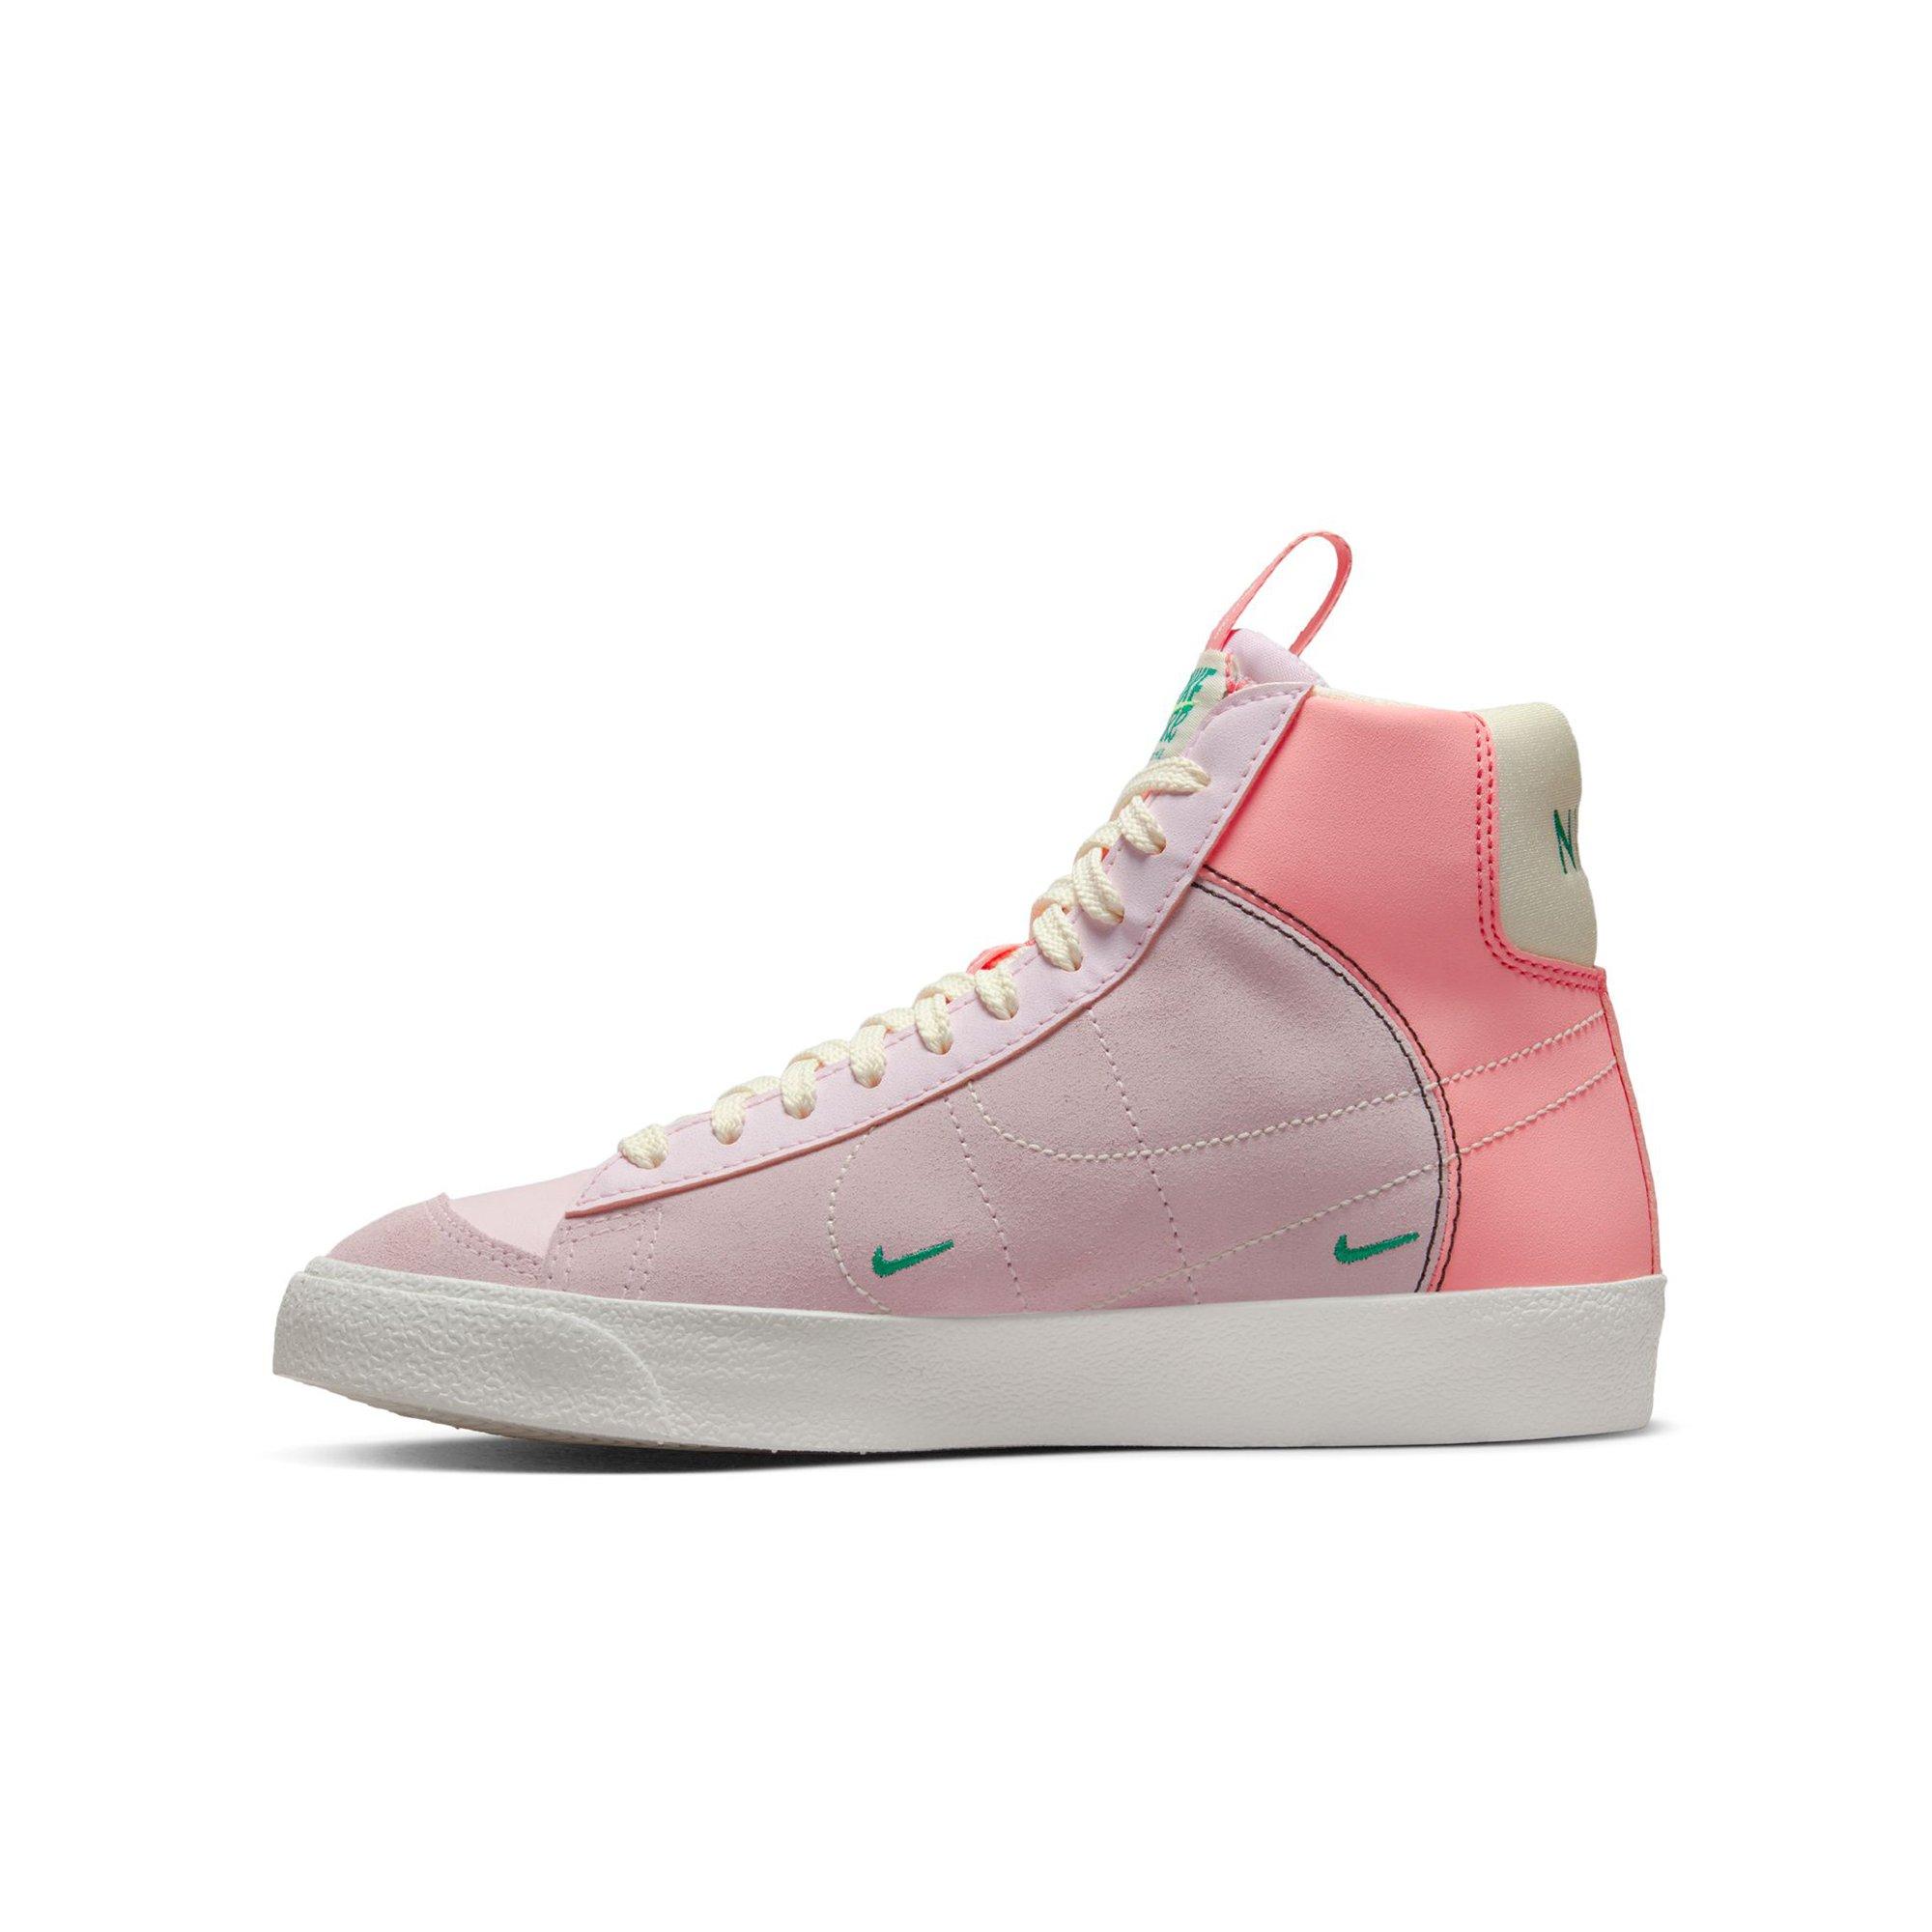 Nike Blazer Mid 77 Pink Foam: Soft and Playful Sneakers for Women